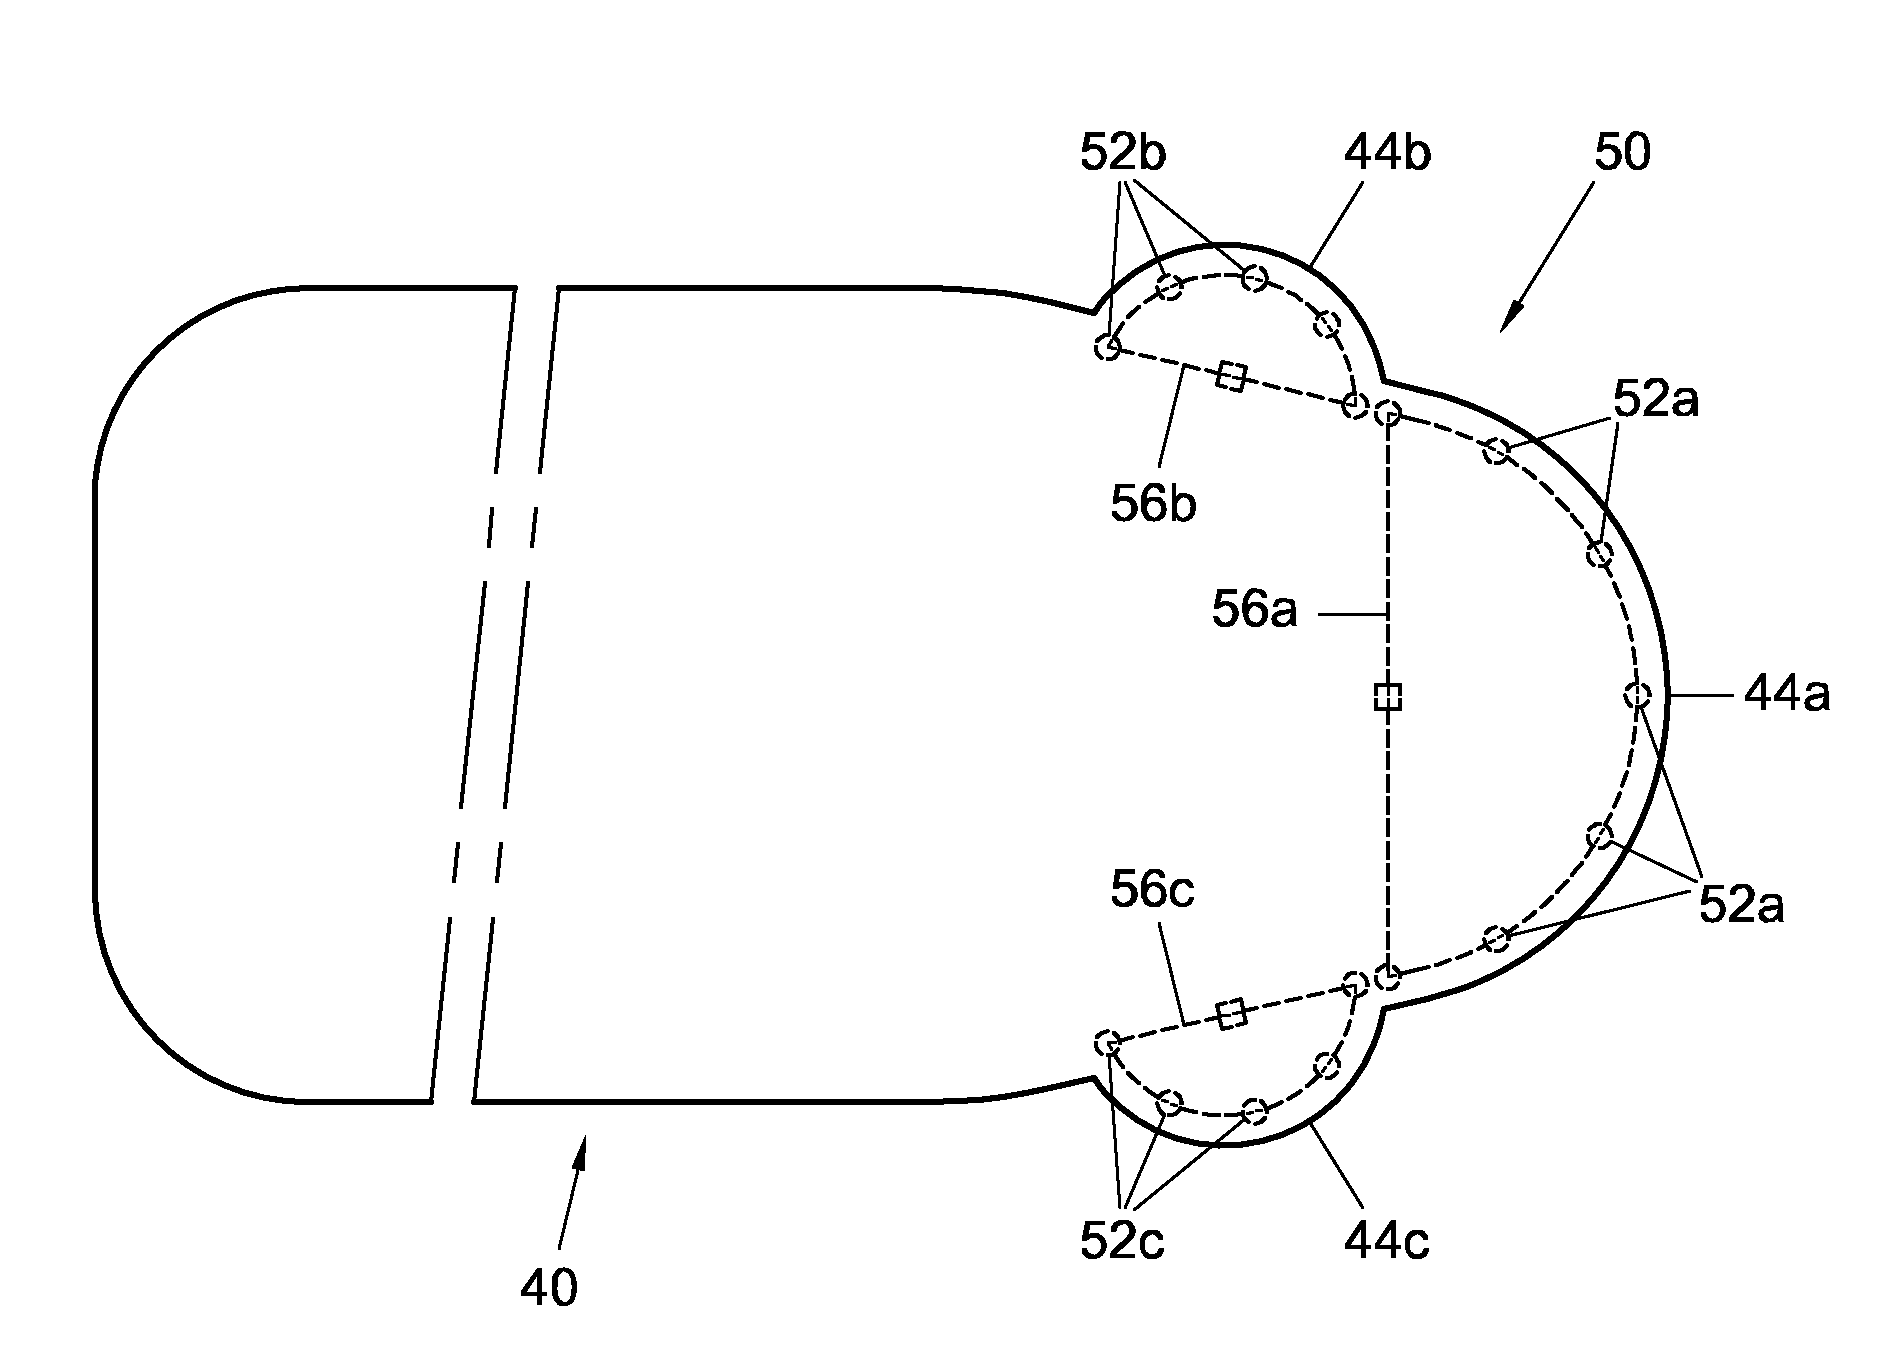 Ironing board assembly with configurable ironing surface and ironing board cover therefor